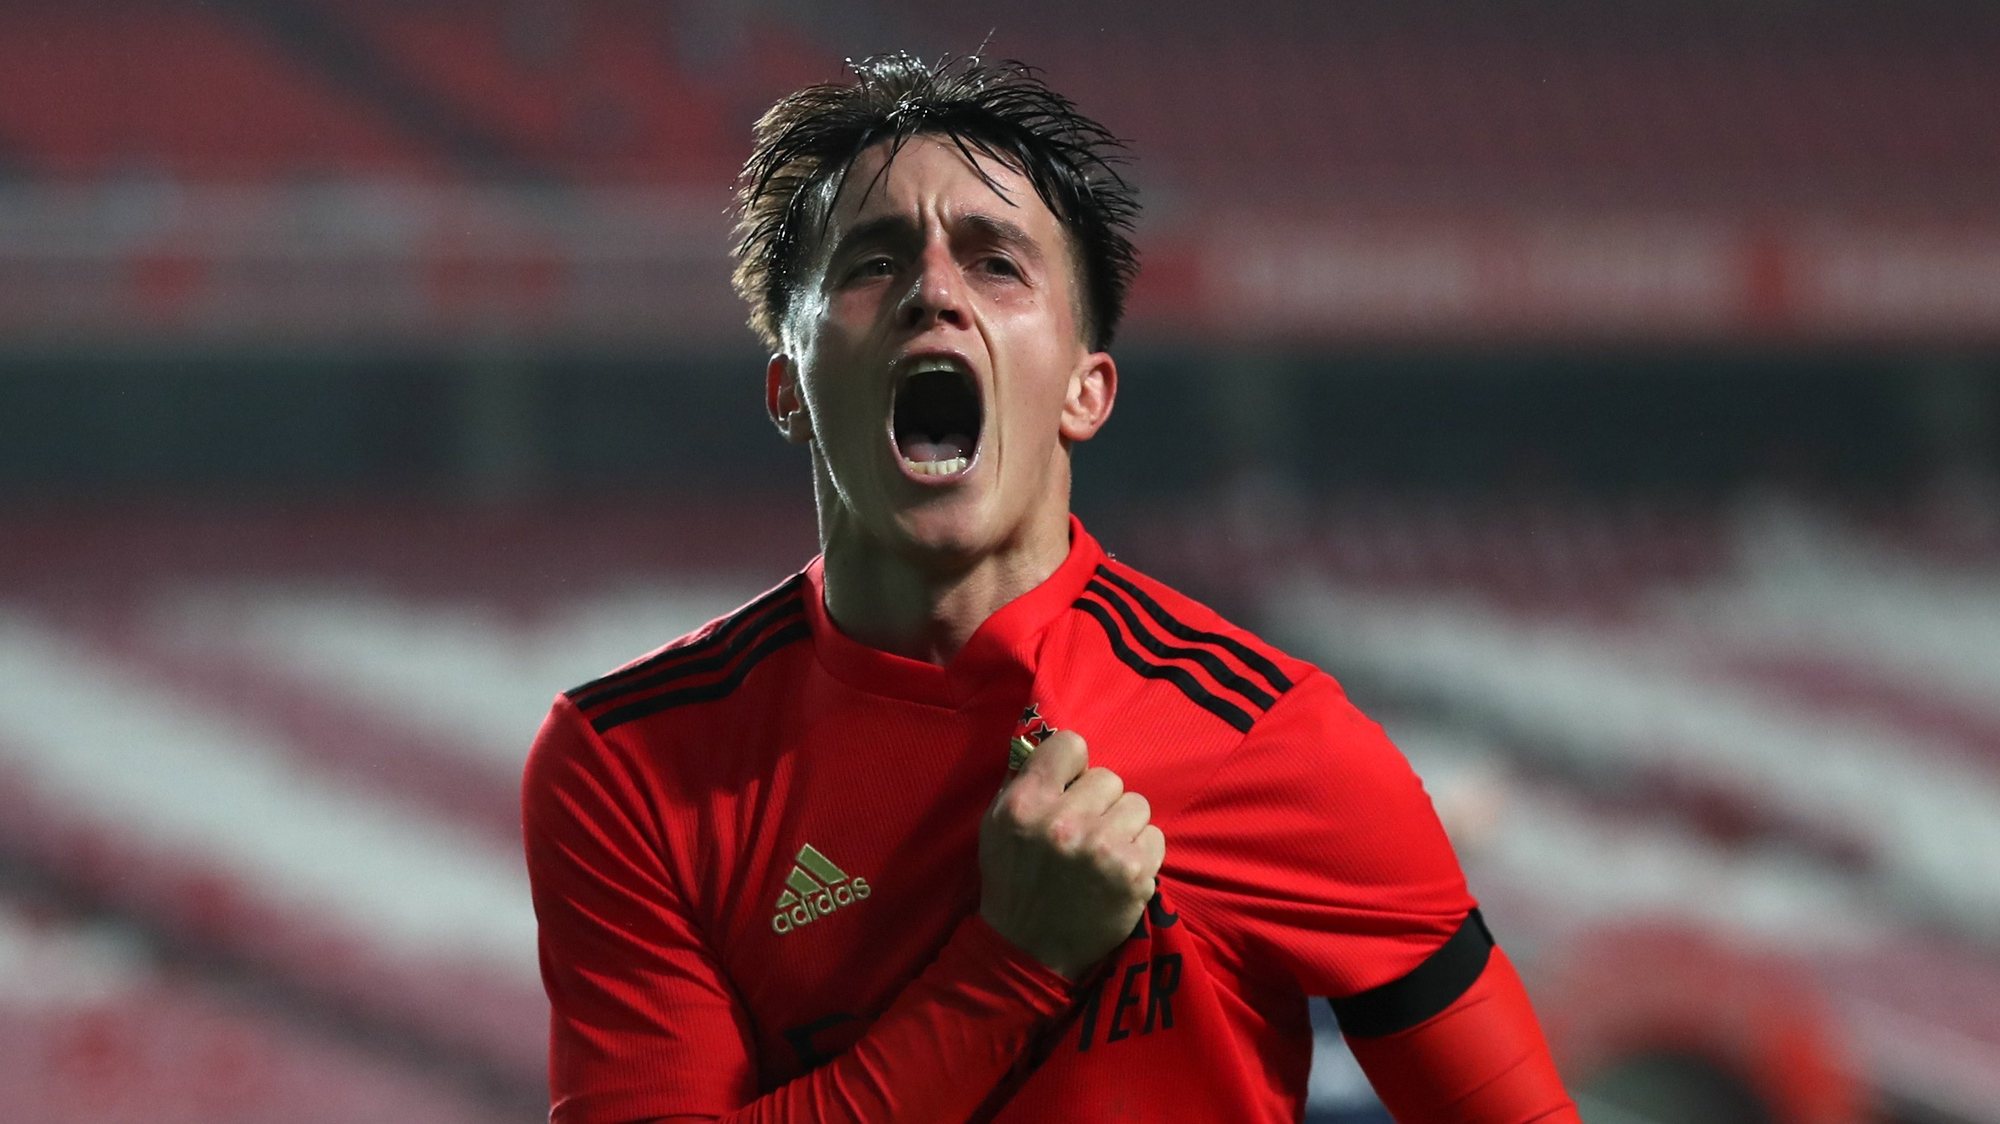 Benfica player Franco Cervi celebrates after scooring a goal against Belenenses SAD during their quarter-finals of the Portuguese Cup soccer match held at Luz Stadium in Lisbon, Portugal, 28 January 2021. MANUEL DE ALMEIDA/LUSA